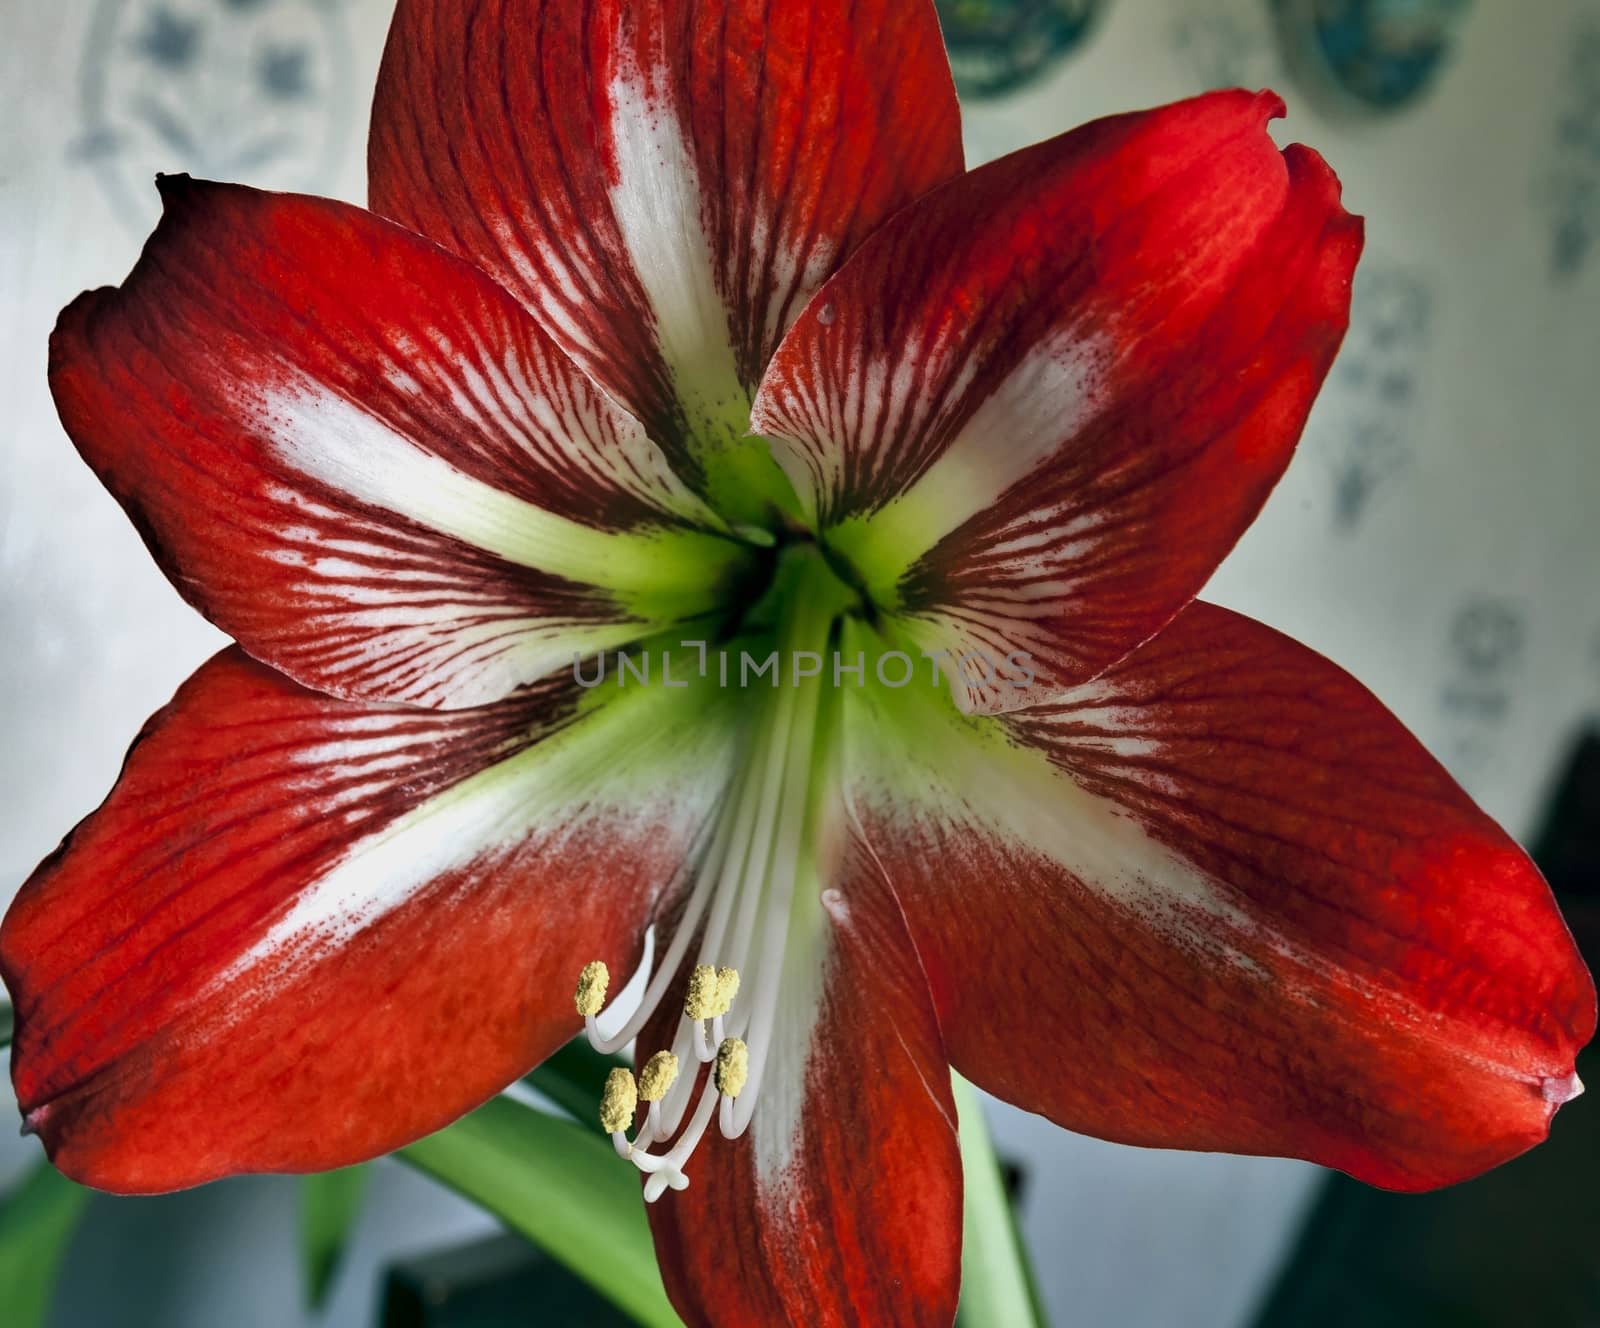 beautiful bright red flower with Latin name Hippeastrum, soft focus, visible stamens with pollen